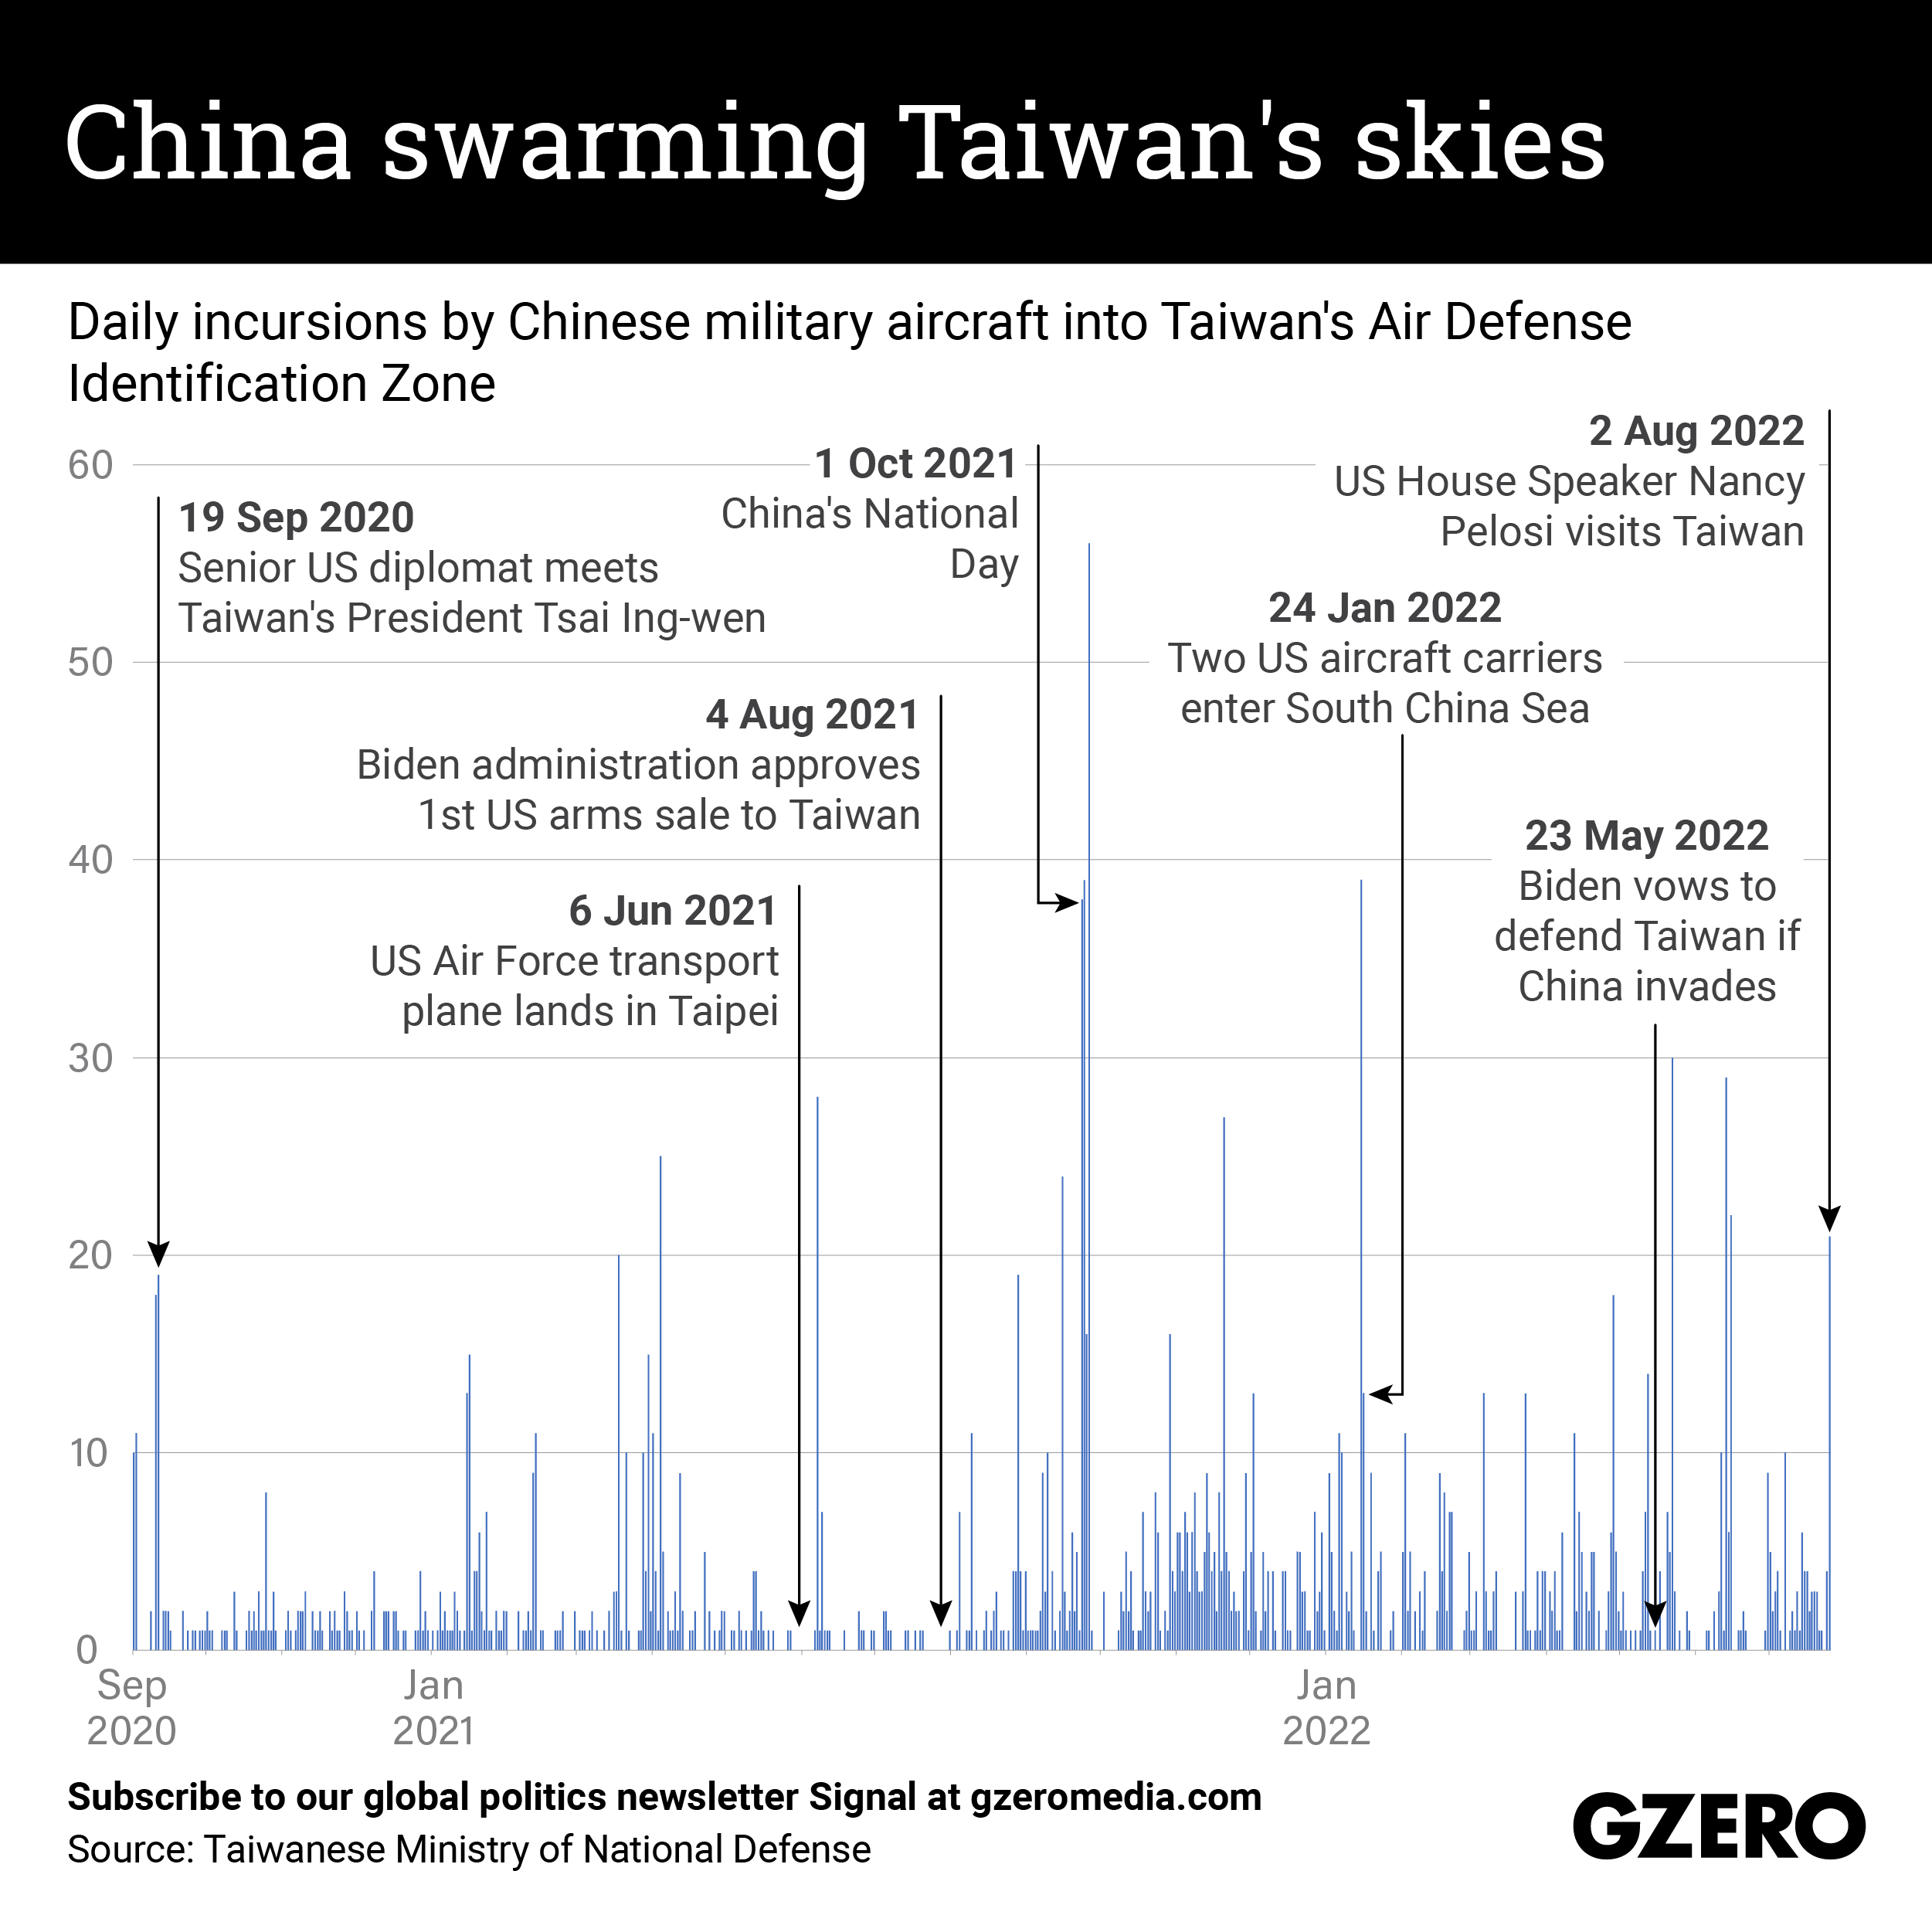 The Graphic Truth: China swarming Taiwan's skies